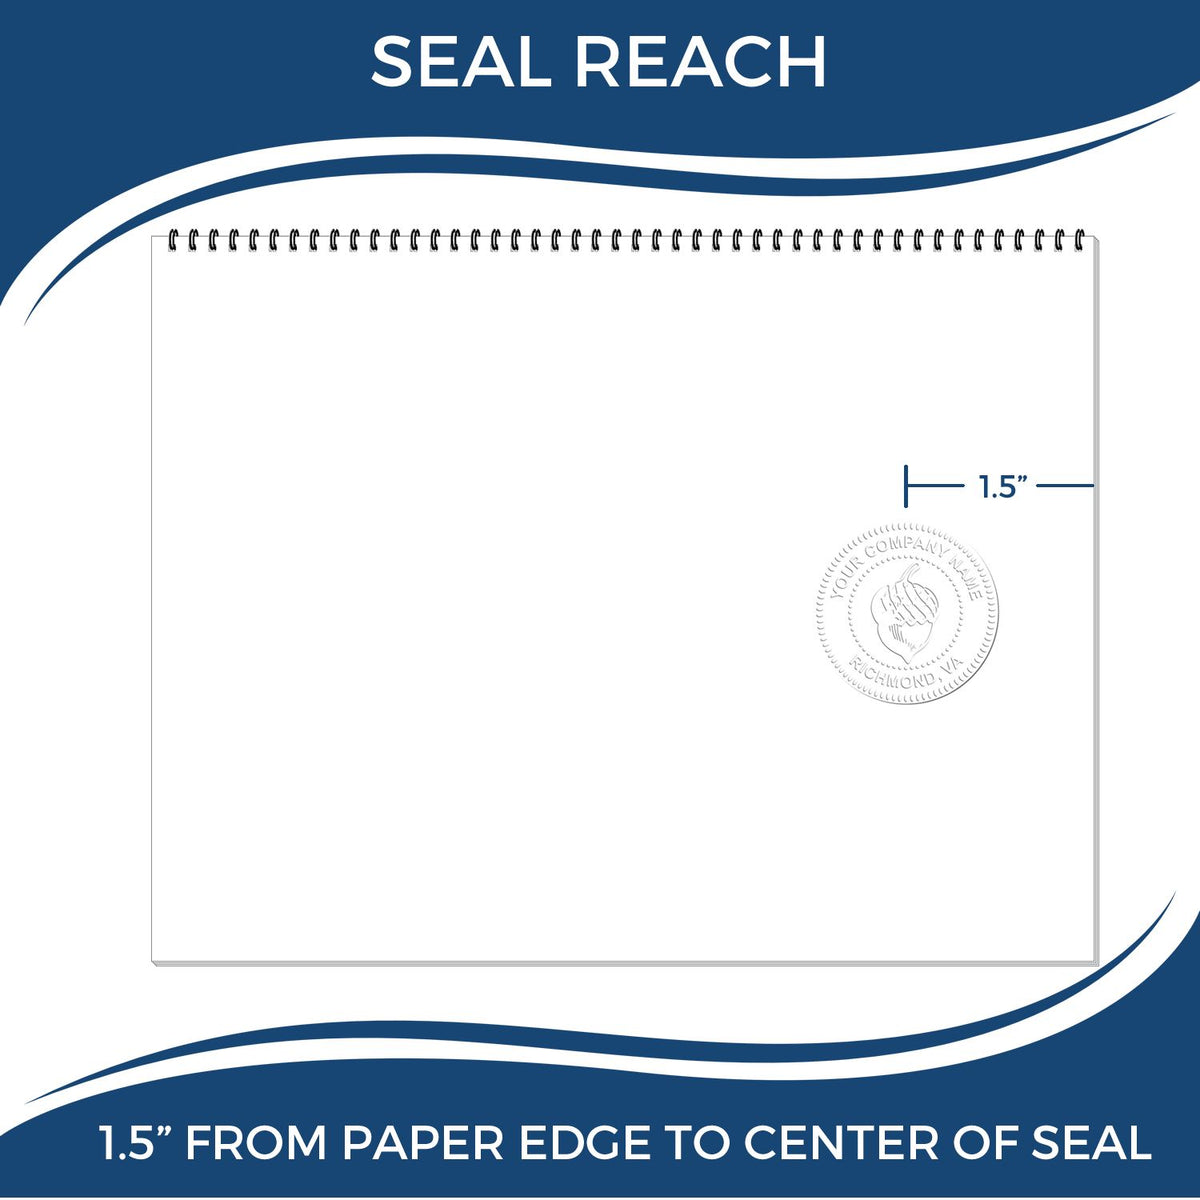 An infographic showing the seal reach which is represented by a ruler and a miniature seal image of the Gift New Mexico Engineer Seal